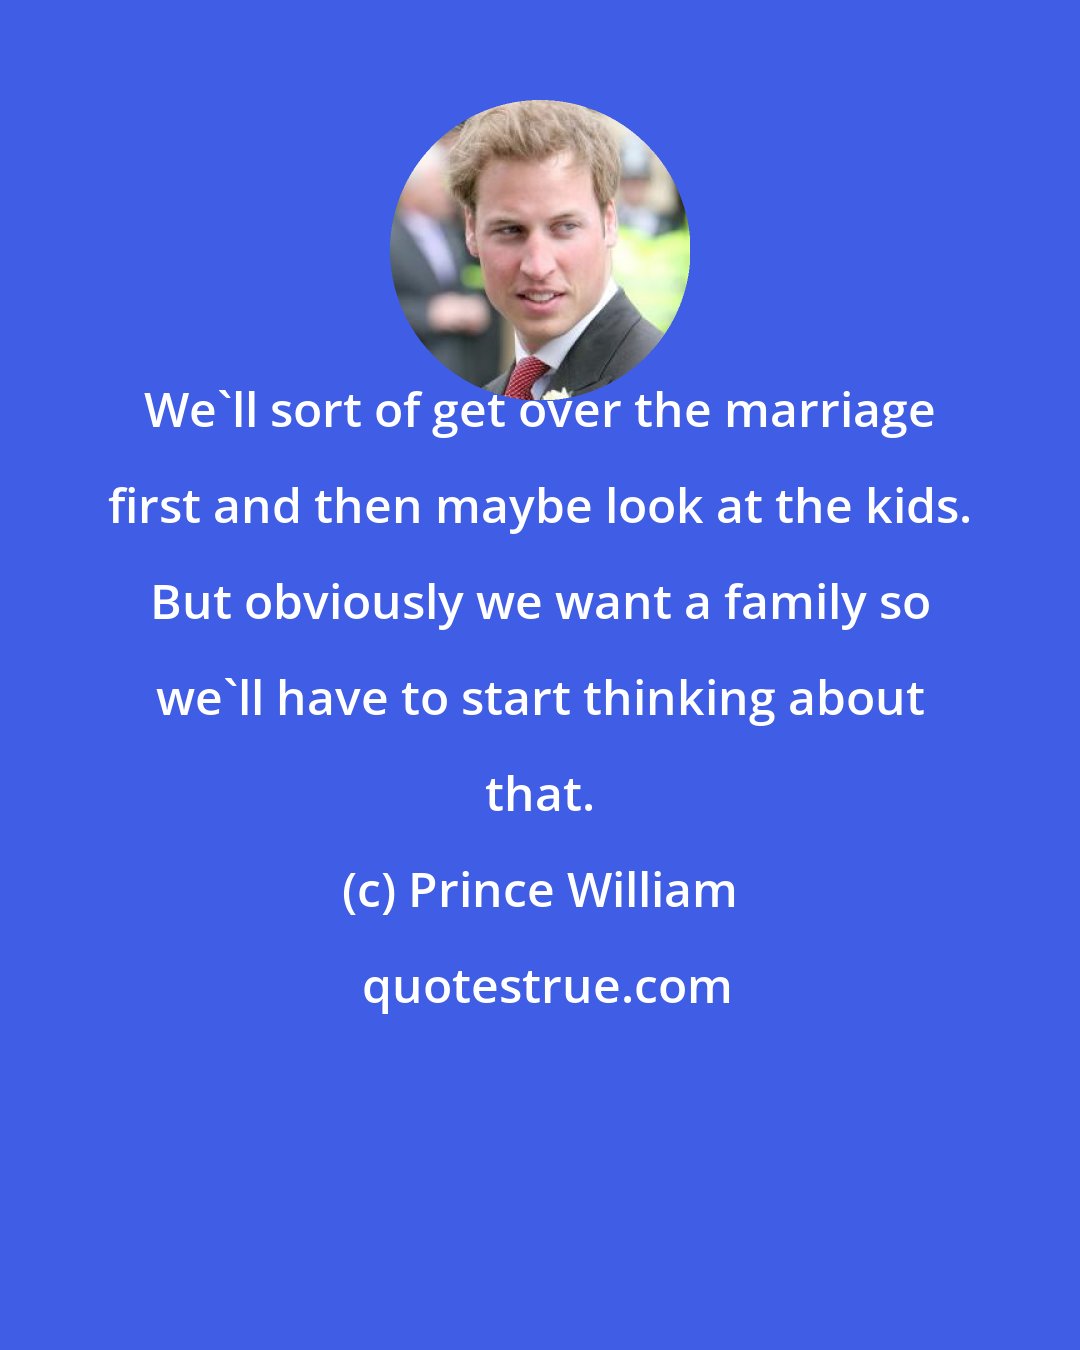 Prince William: We'll sort of get over the marriage first and then maybe look at the kids. But obviously we want a family so we'll have to start thinking about that.